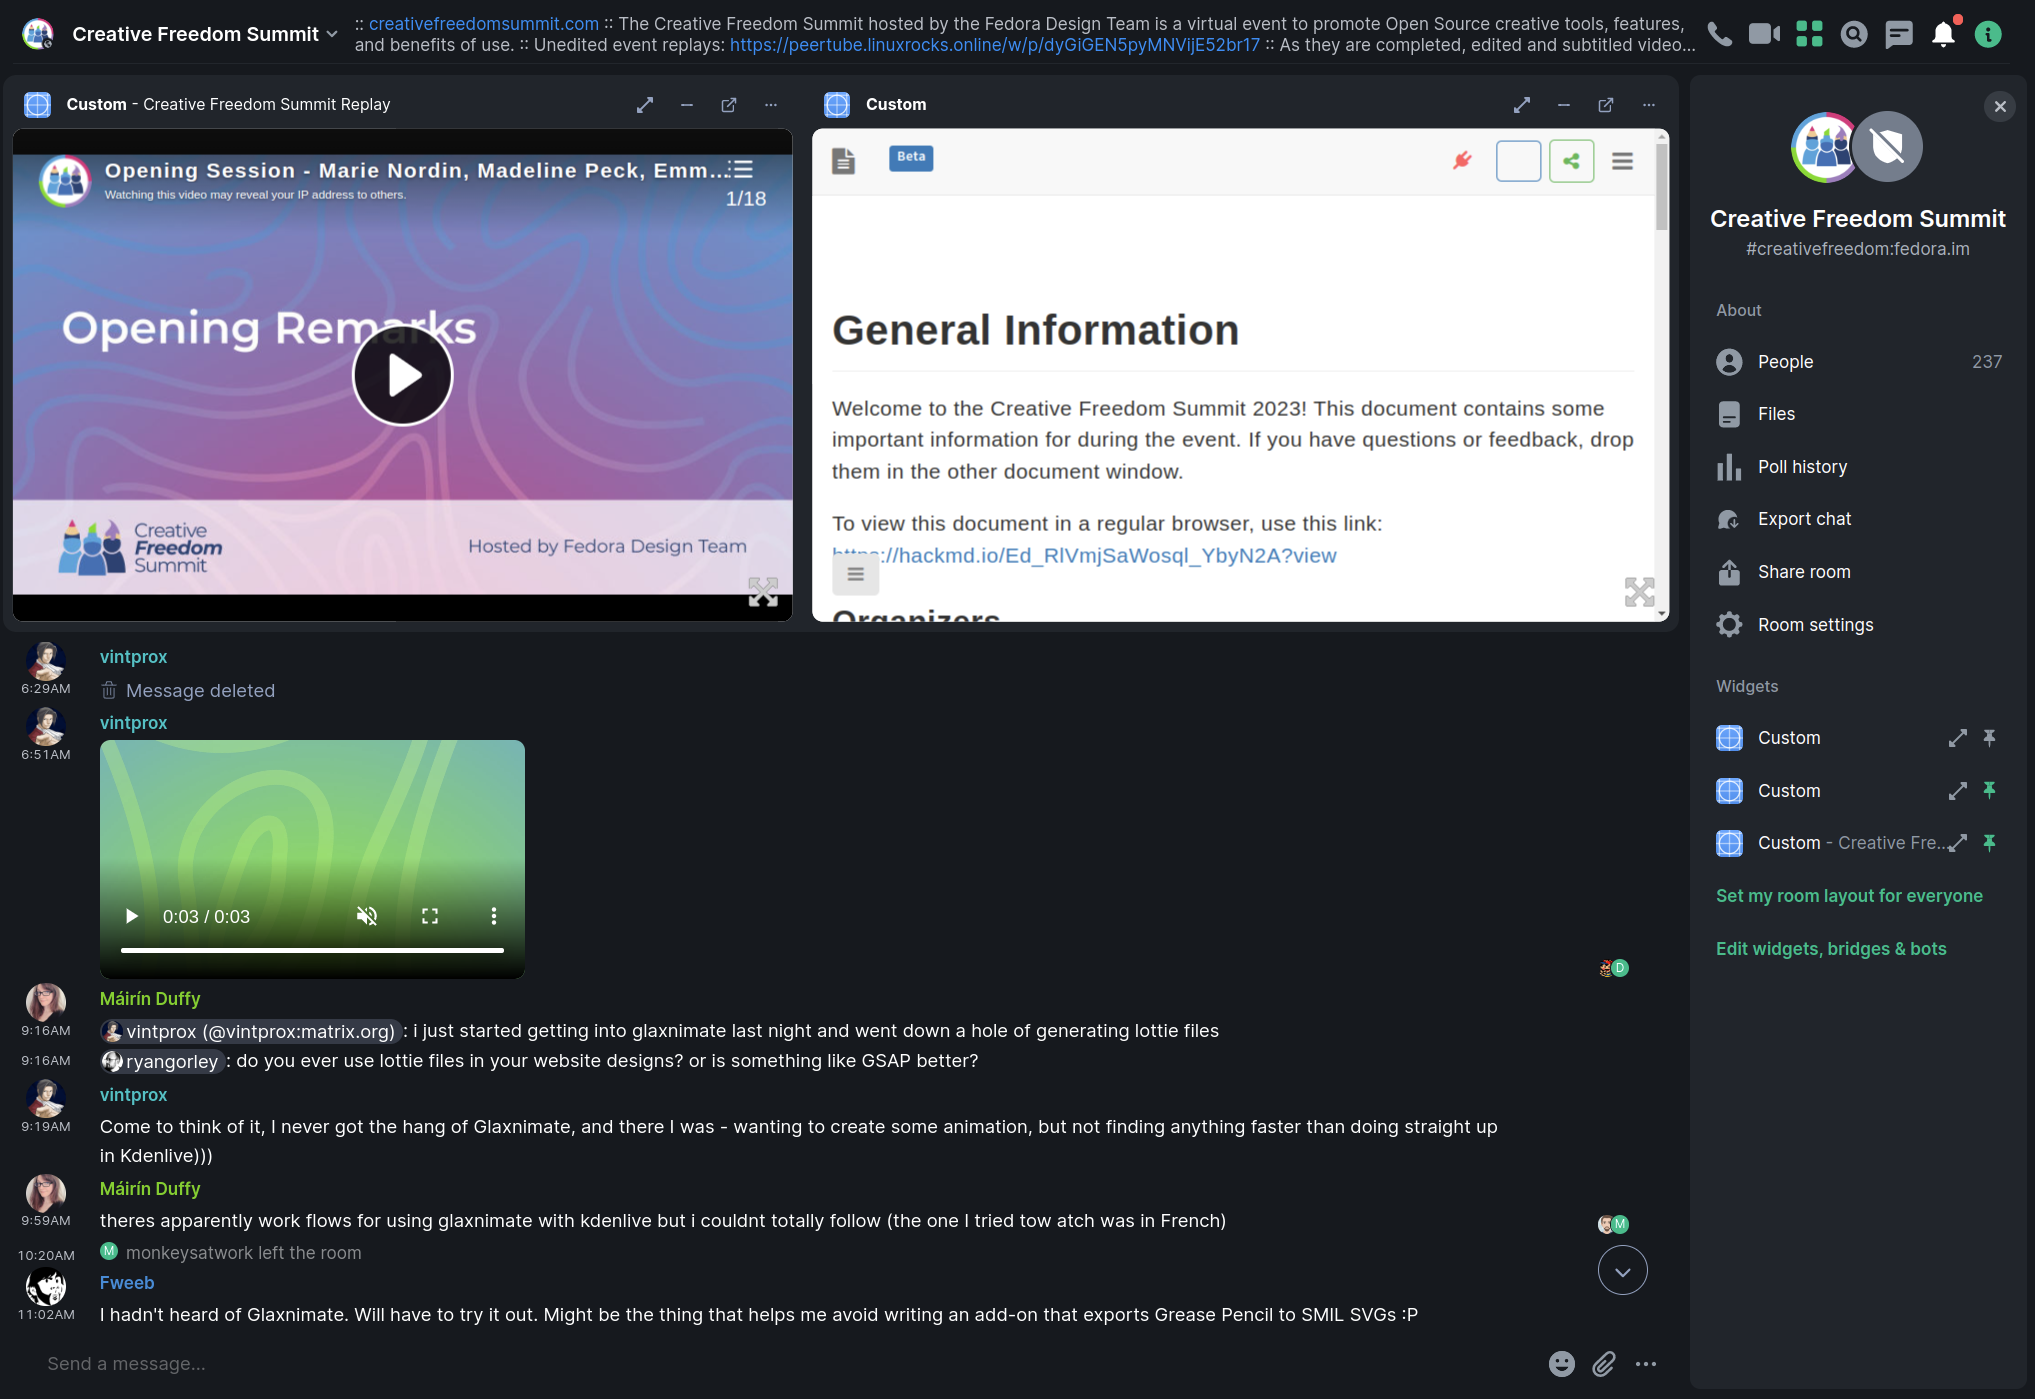 A video feed is in the upper left corner, a hackmd.io announcement page in the upper right, and an active chat below.